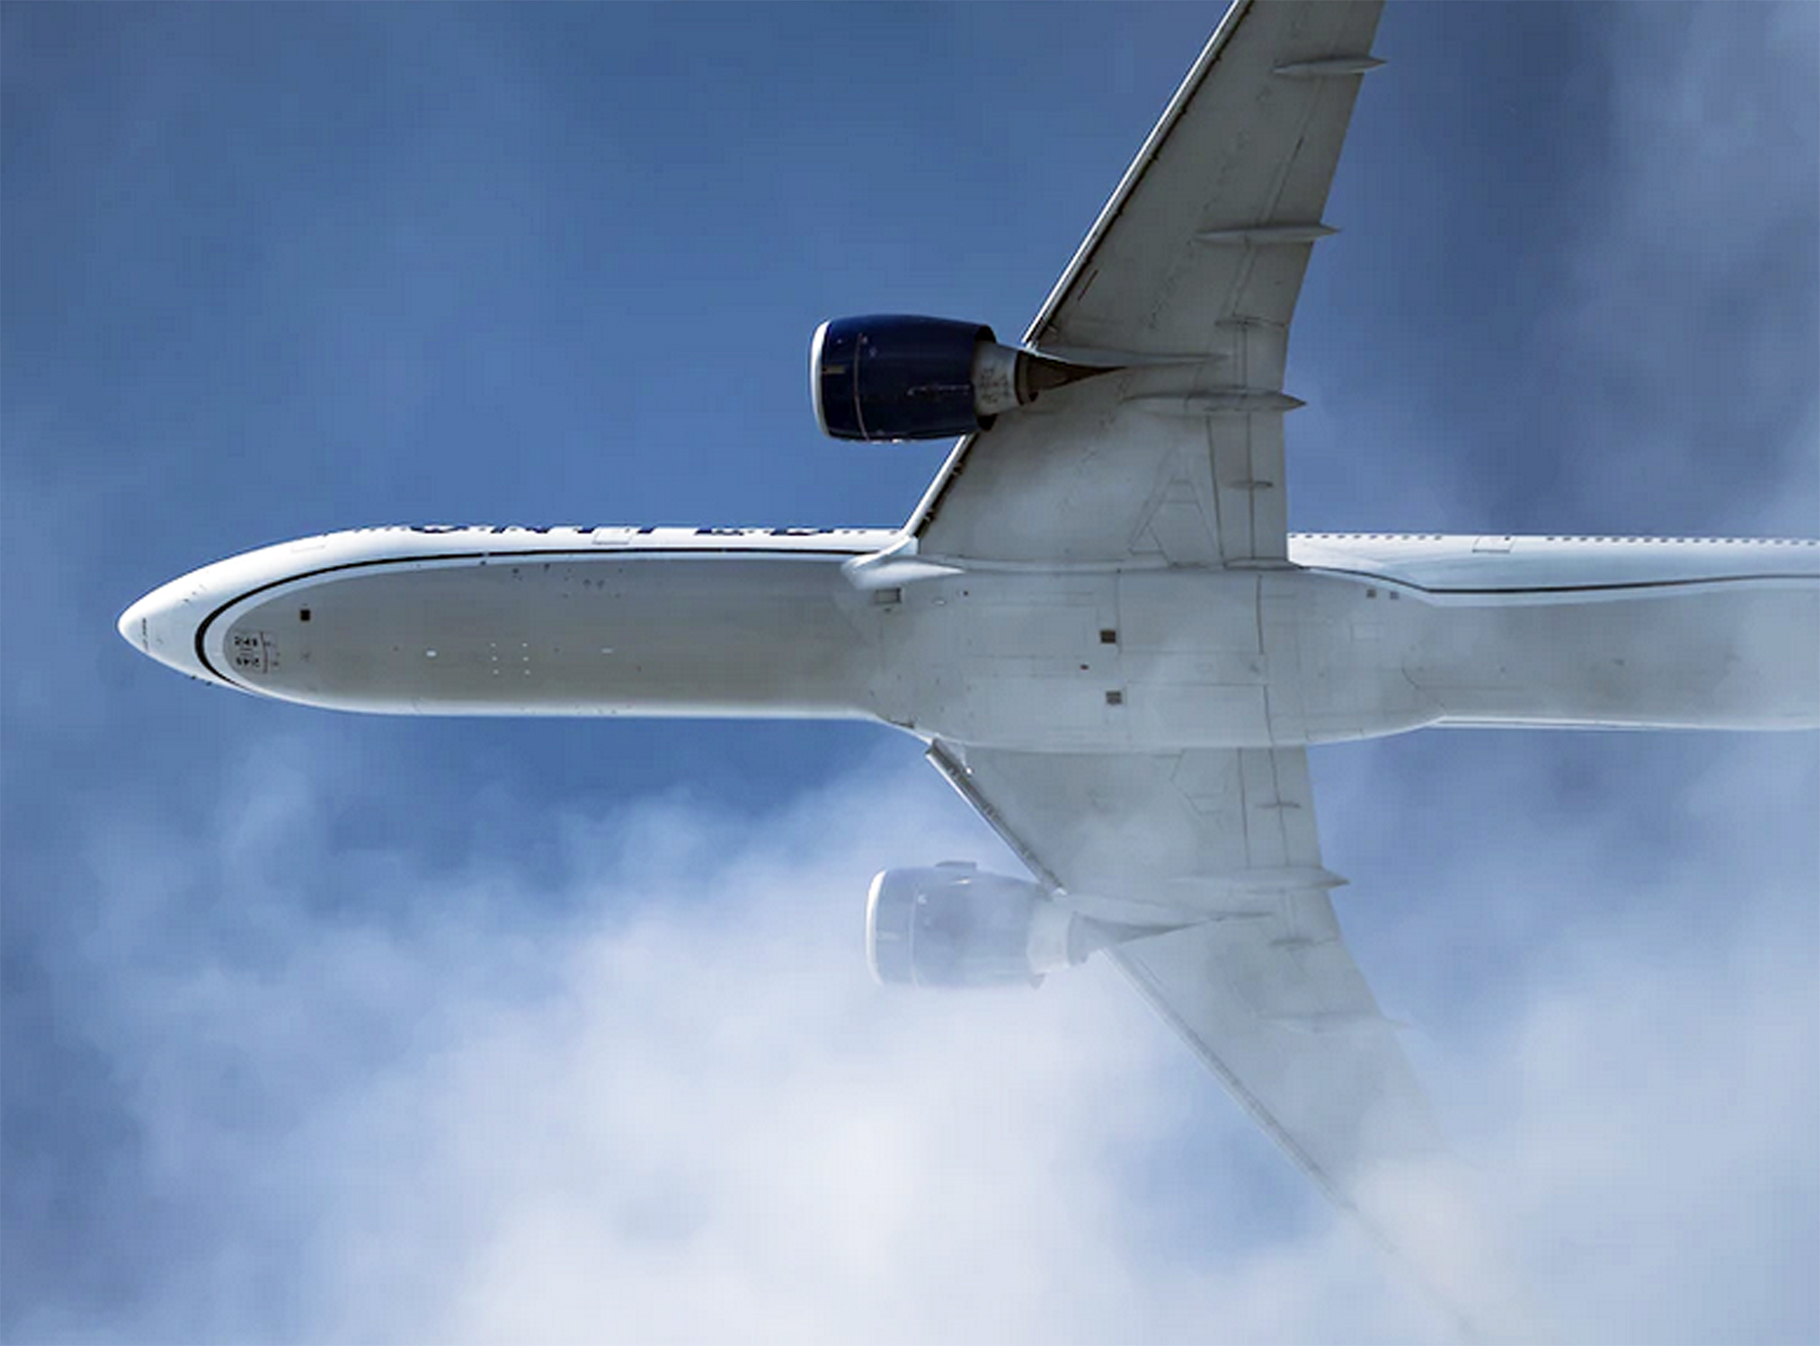 Flying shame: the scandalous rise of private jets, Airline emissions